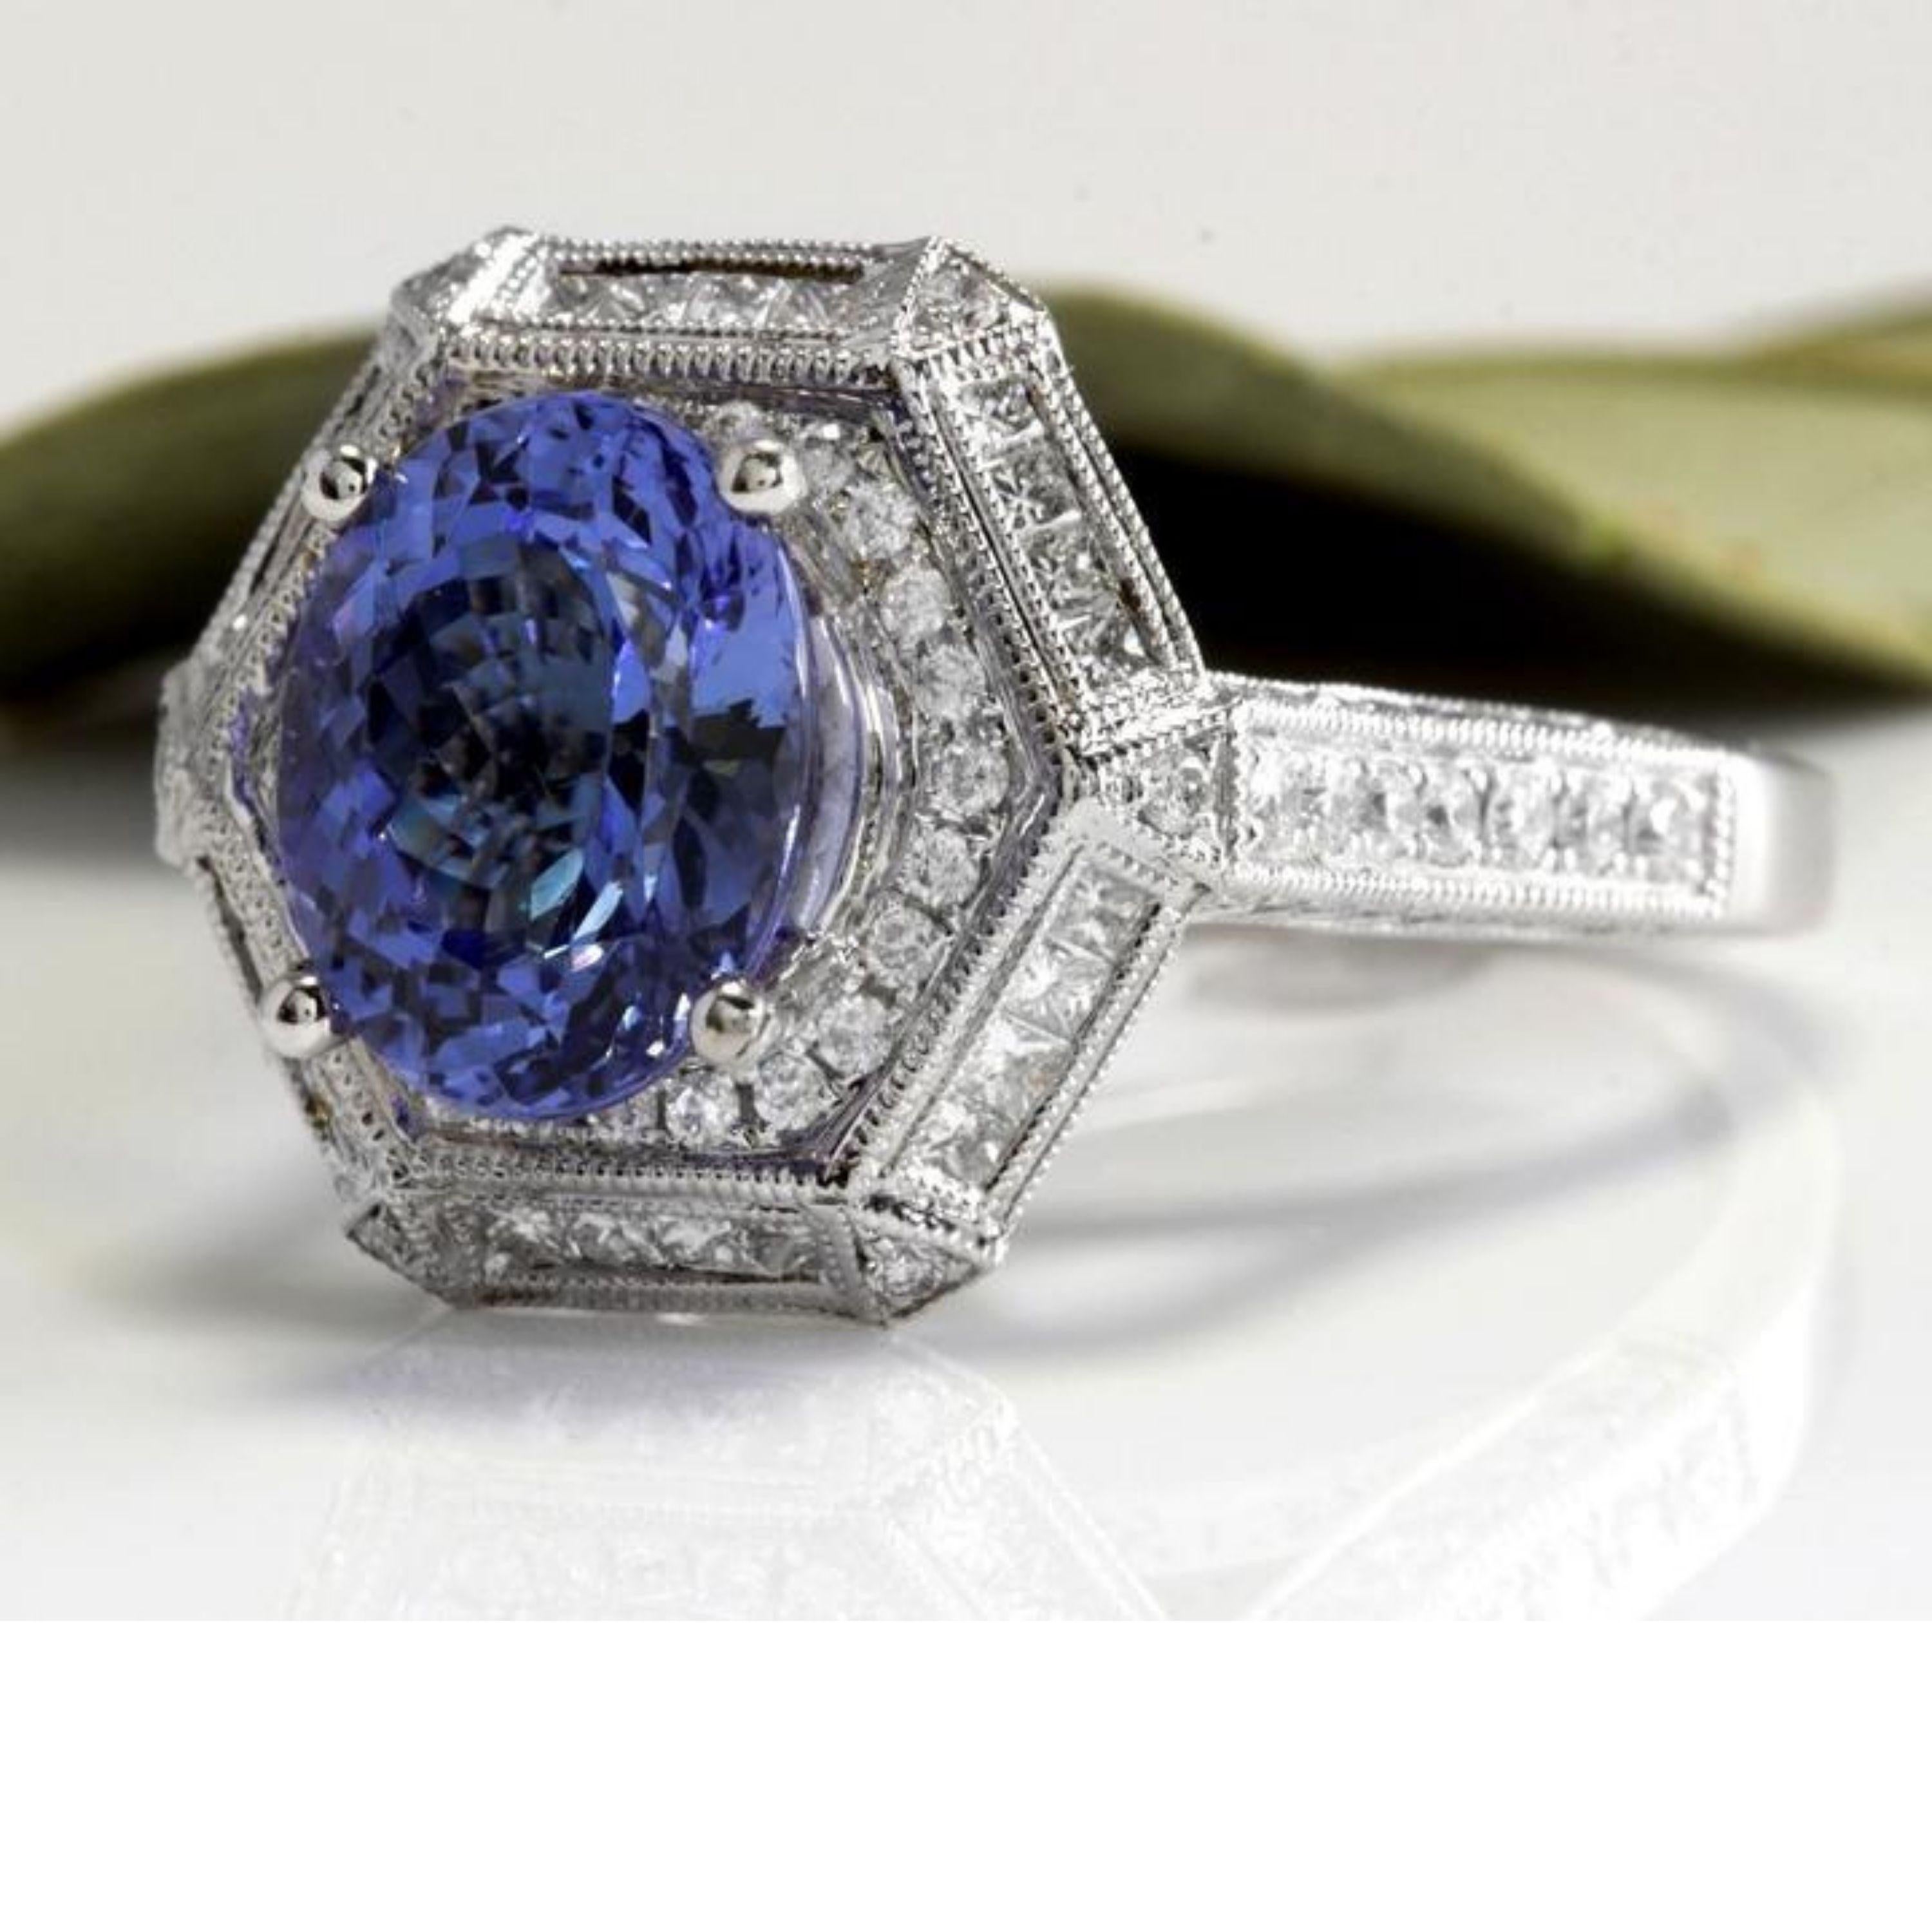 5.35 Carats Natural Very Nice Looking Tanzanite and VS1 Diamond 18K Solid White Gold Ring

Total Natural Oval Cut Tanzanite Weight is: 3.50 Carats

Natural Round & Princess Diamonds Weight: 1.85 Carats (color F-G / Clarity VS1

Ring size: 7 (we